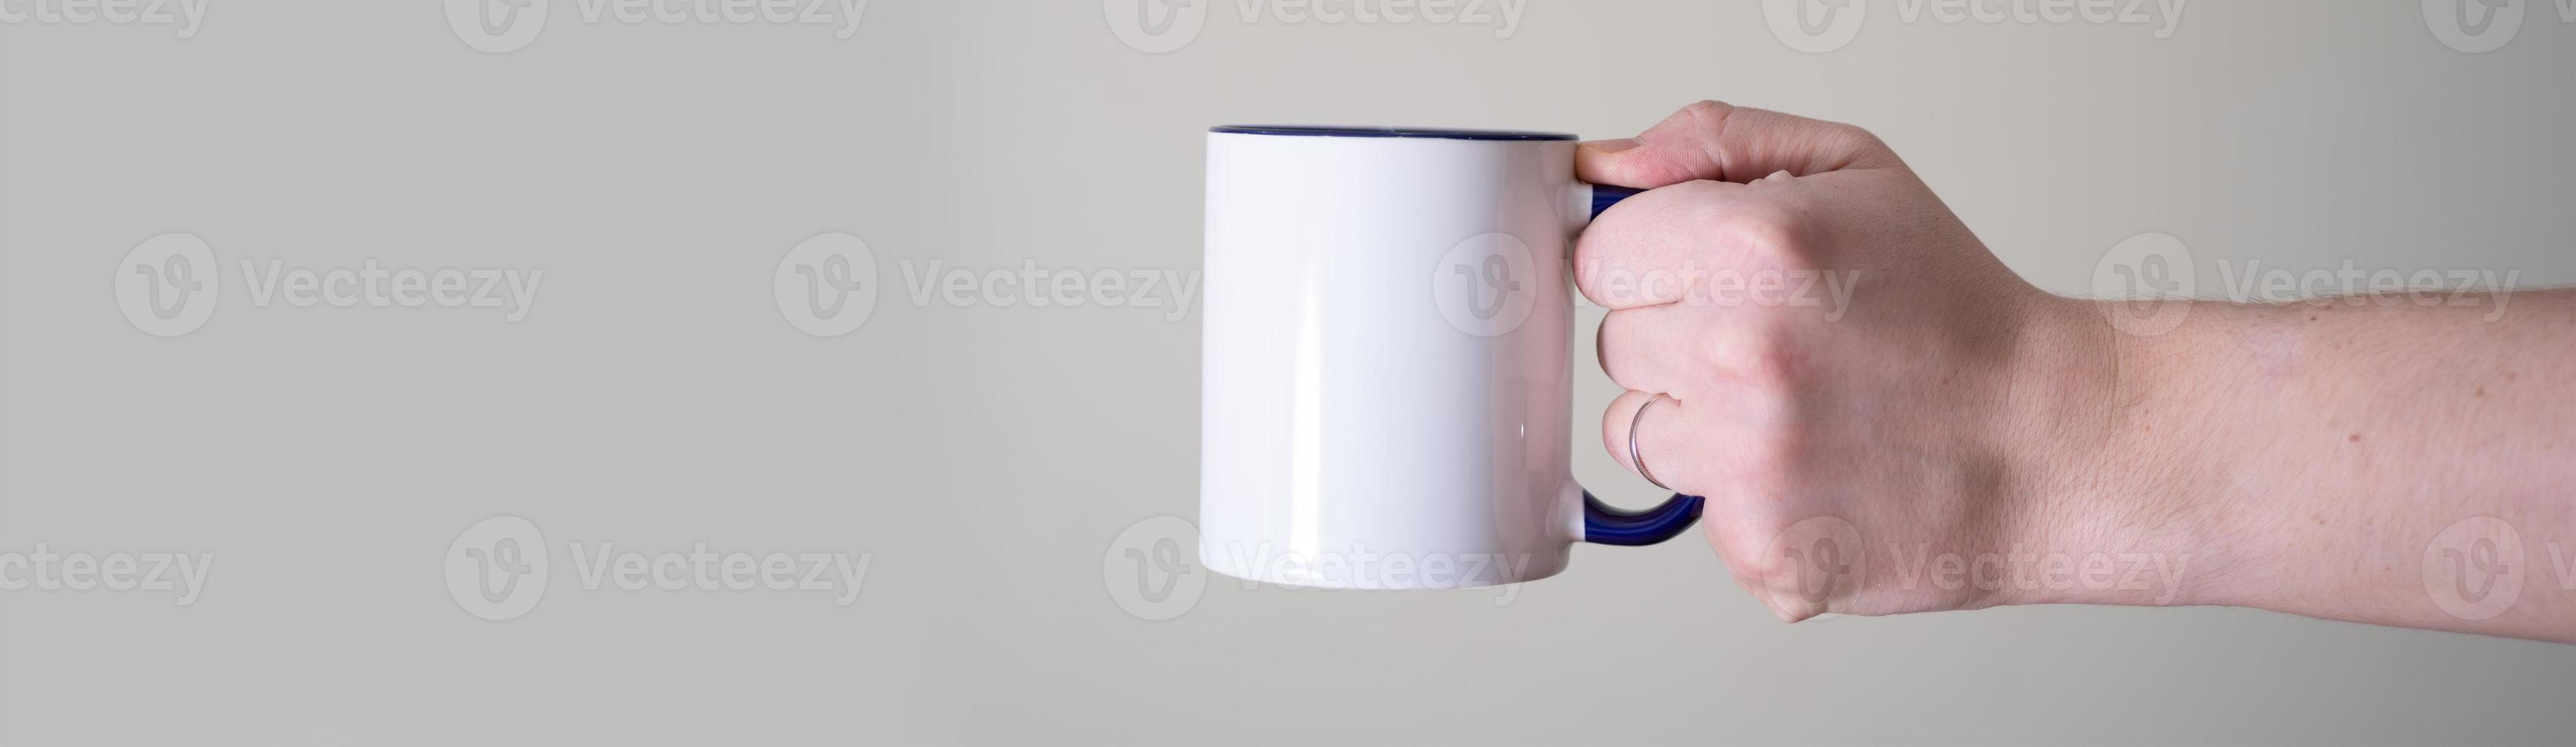 White mug in the hands of a man on a light background. photo